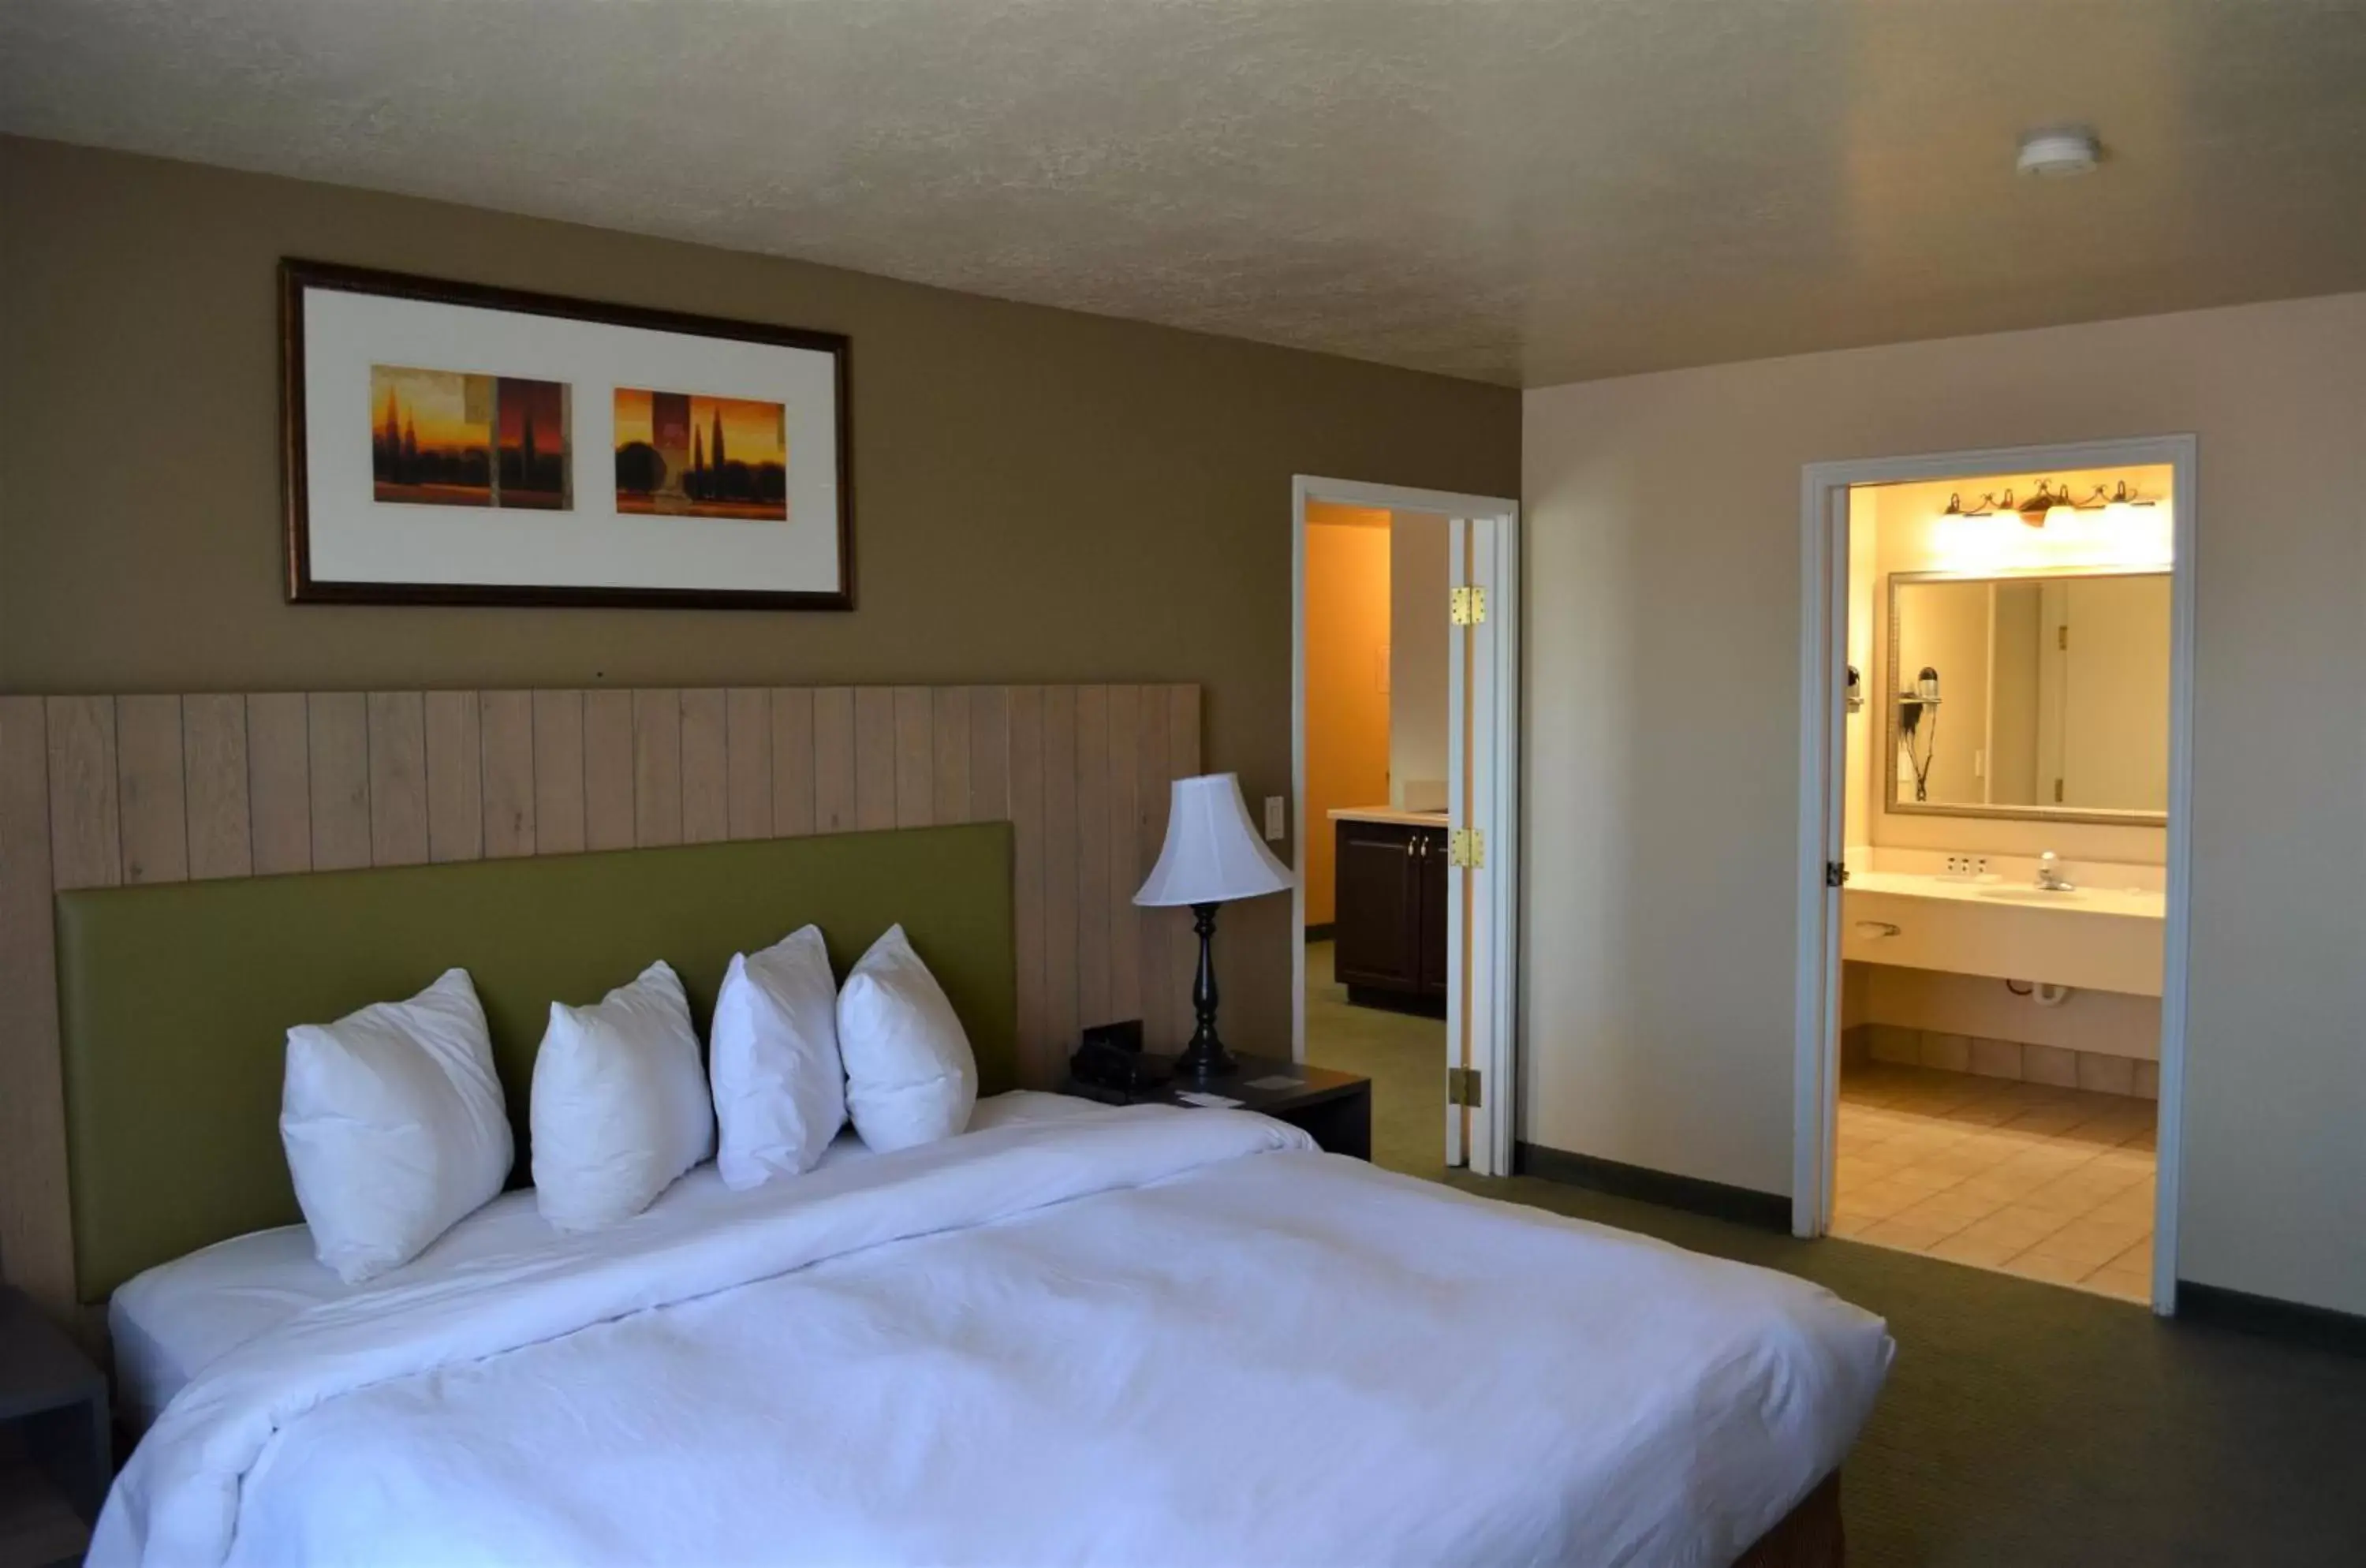 Bathroom, Bed in Country Inn & Suites by Radisson, West Valley City, UT